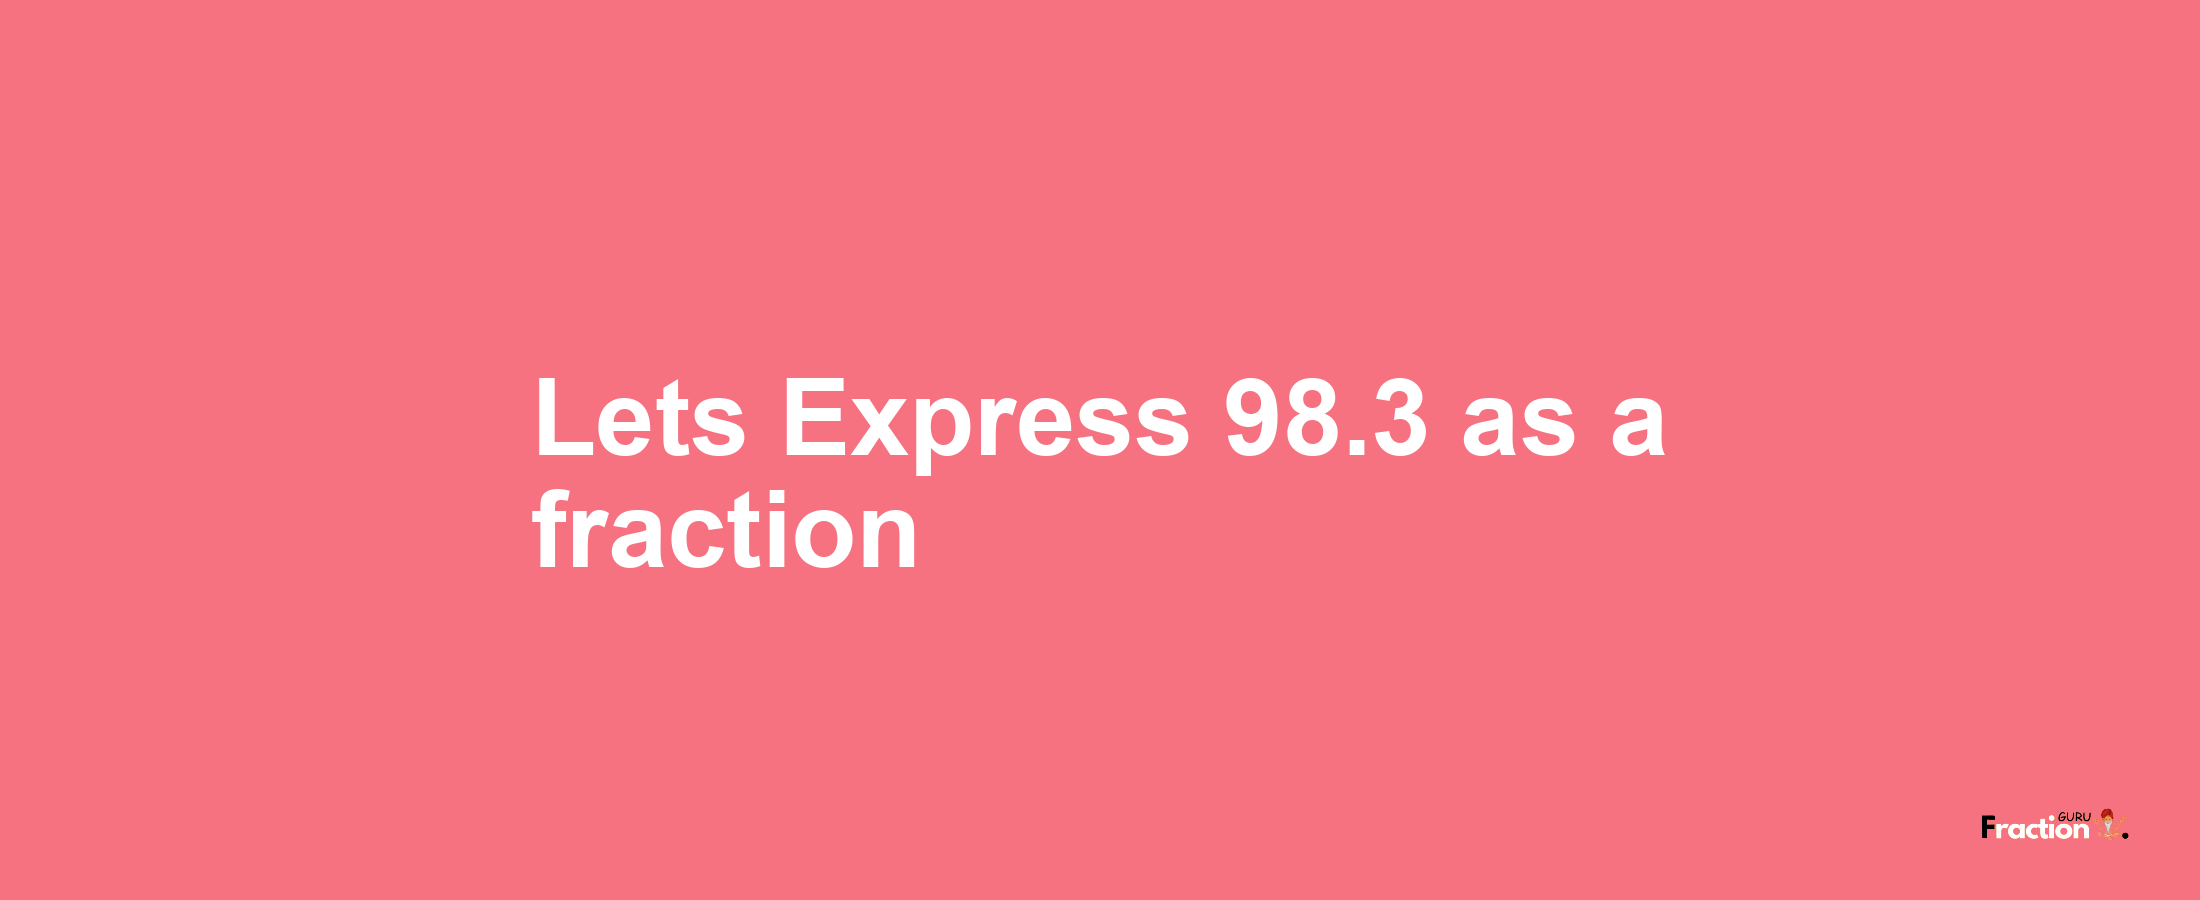 Lets Express 98.3 as afraction